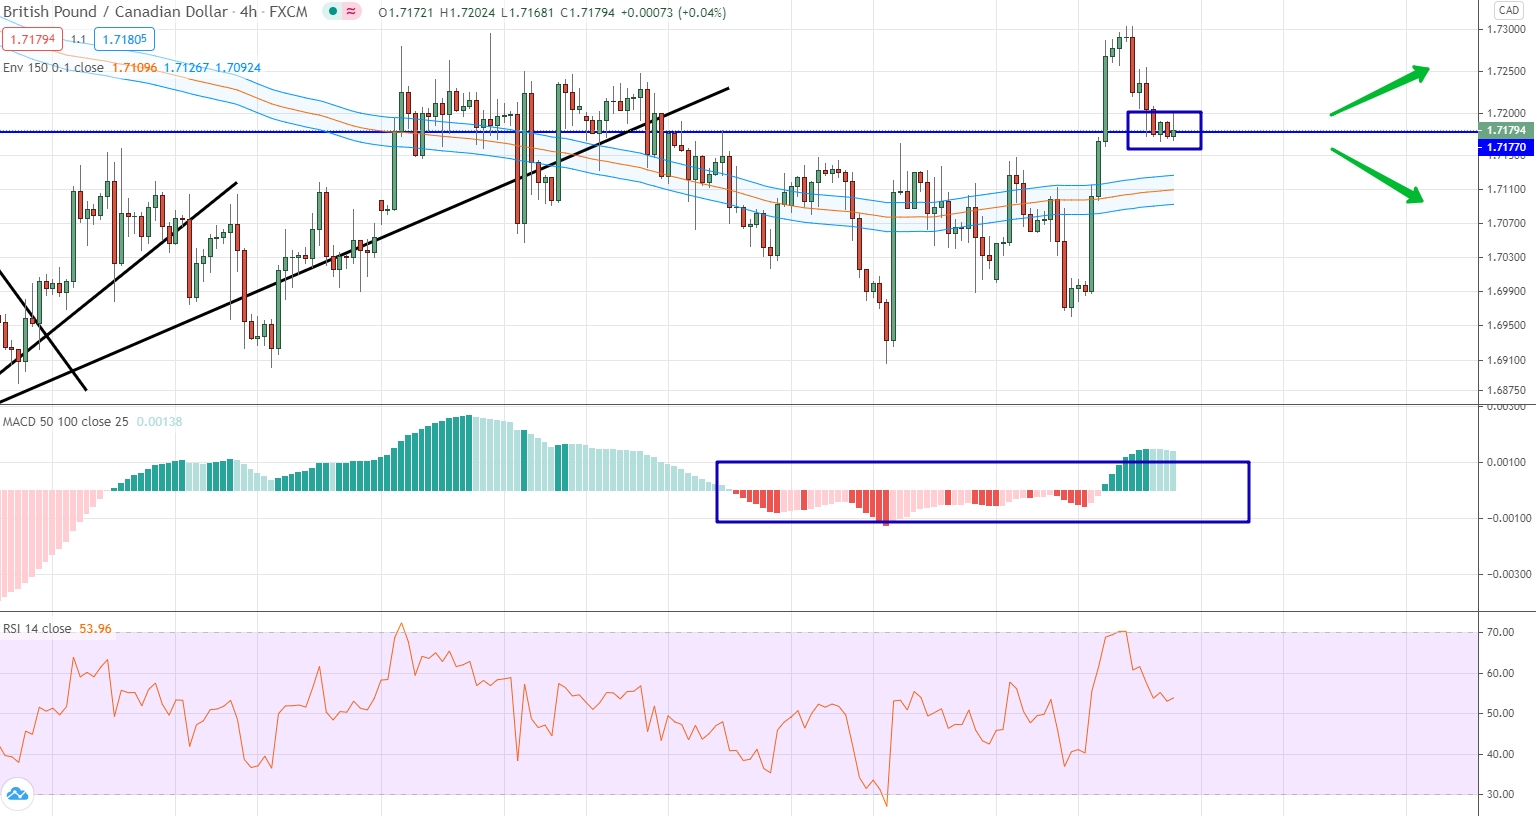 GBP/CAD analysis by moving averages, RSI and MACD